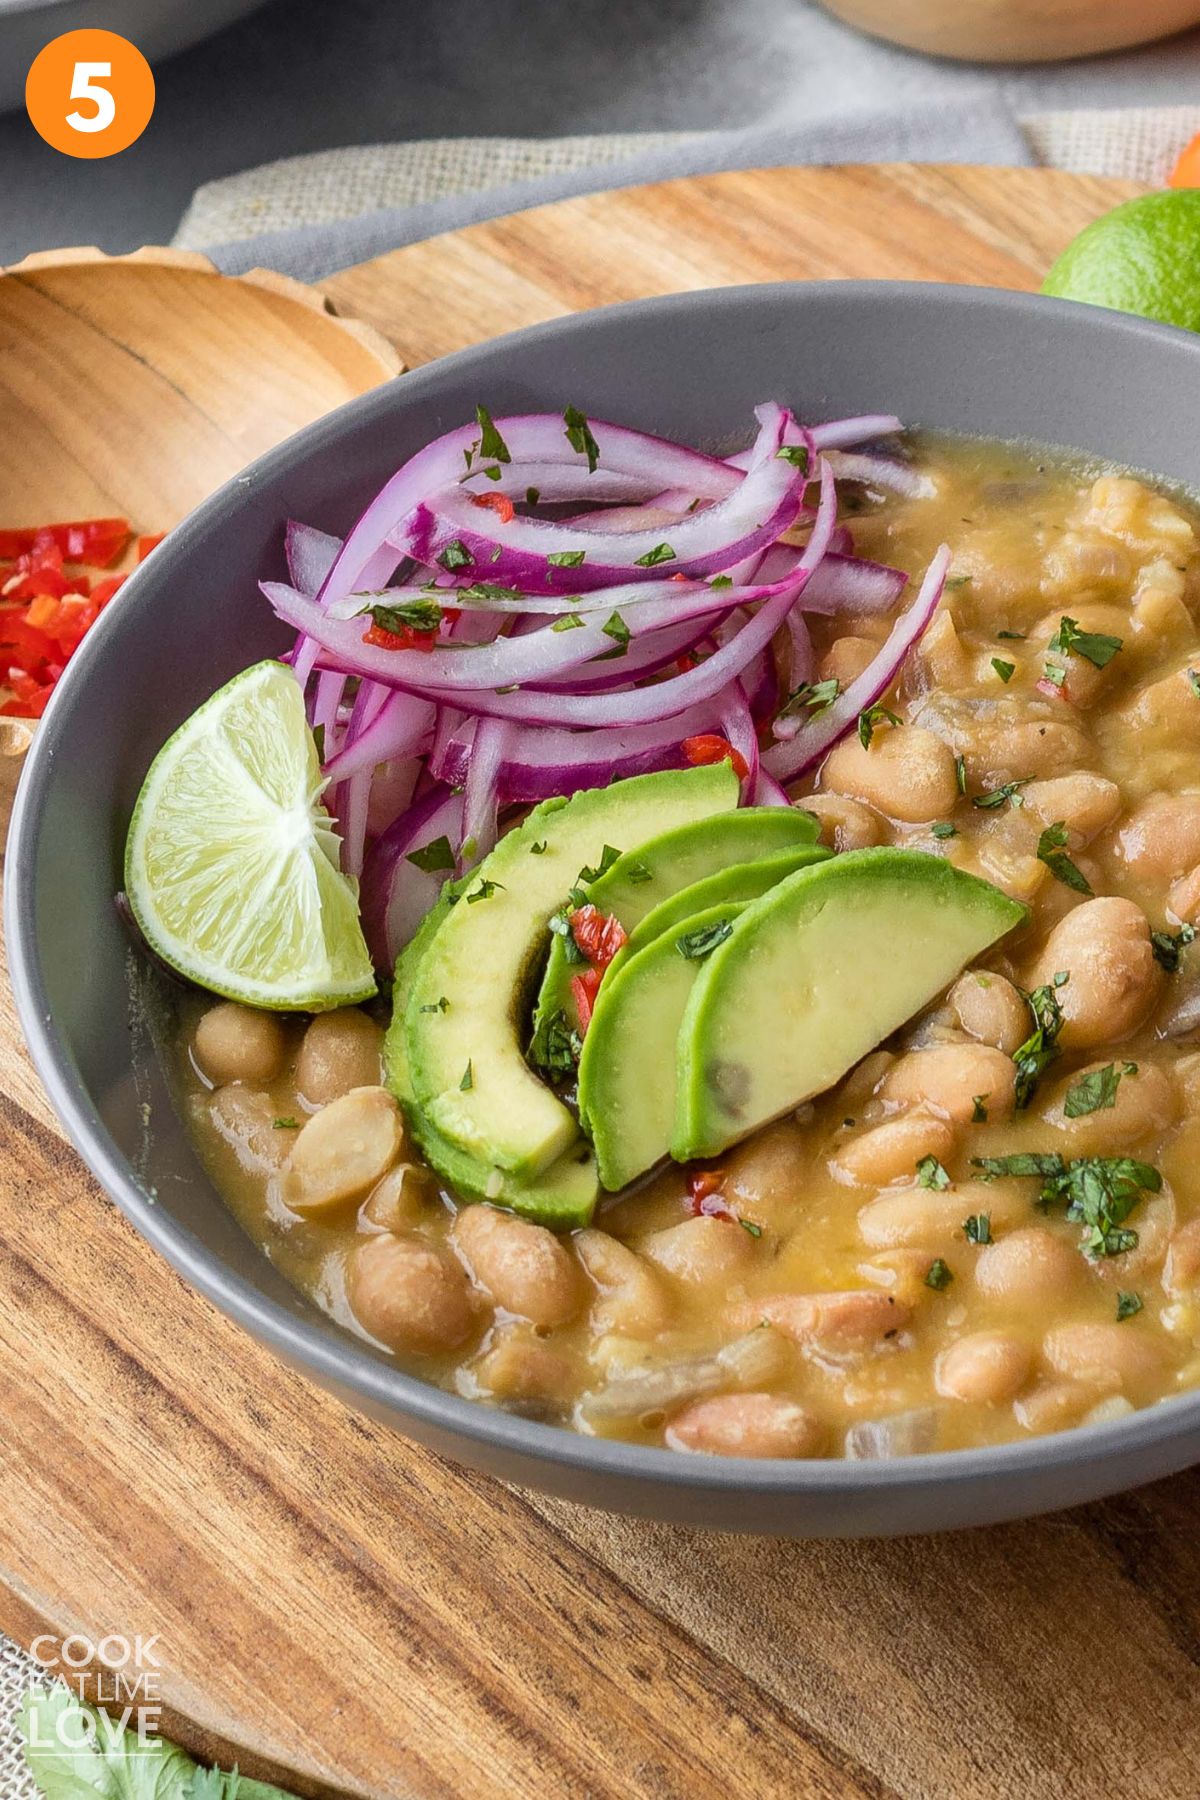 A bowl of peruano beans on the table with avocado and onion.